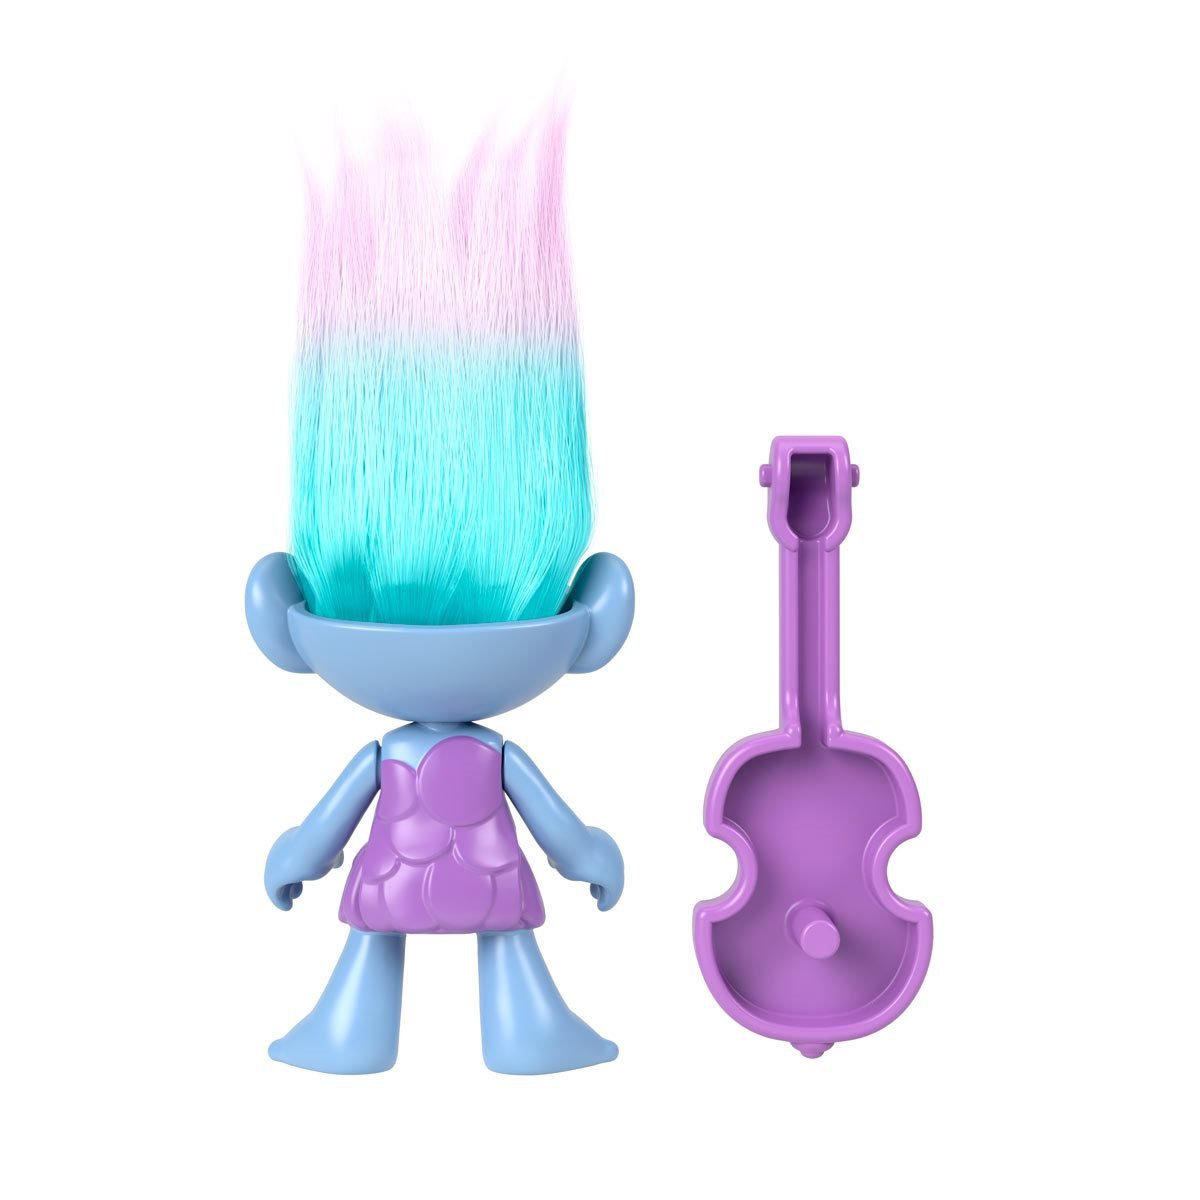 Imaginext DreamWorks Trolls Collection of Blind Bag Mystery Figure &  Accessory Sets, Styles May Vary